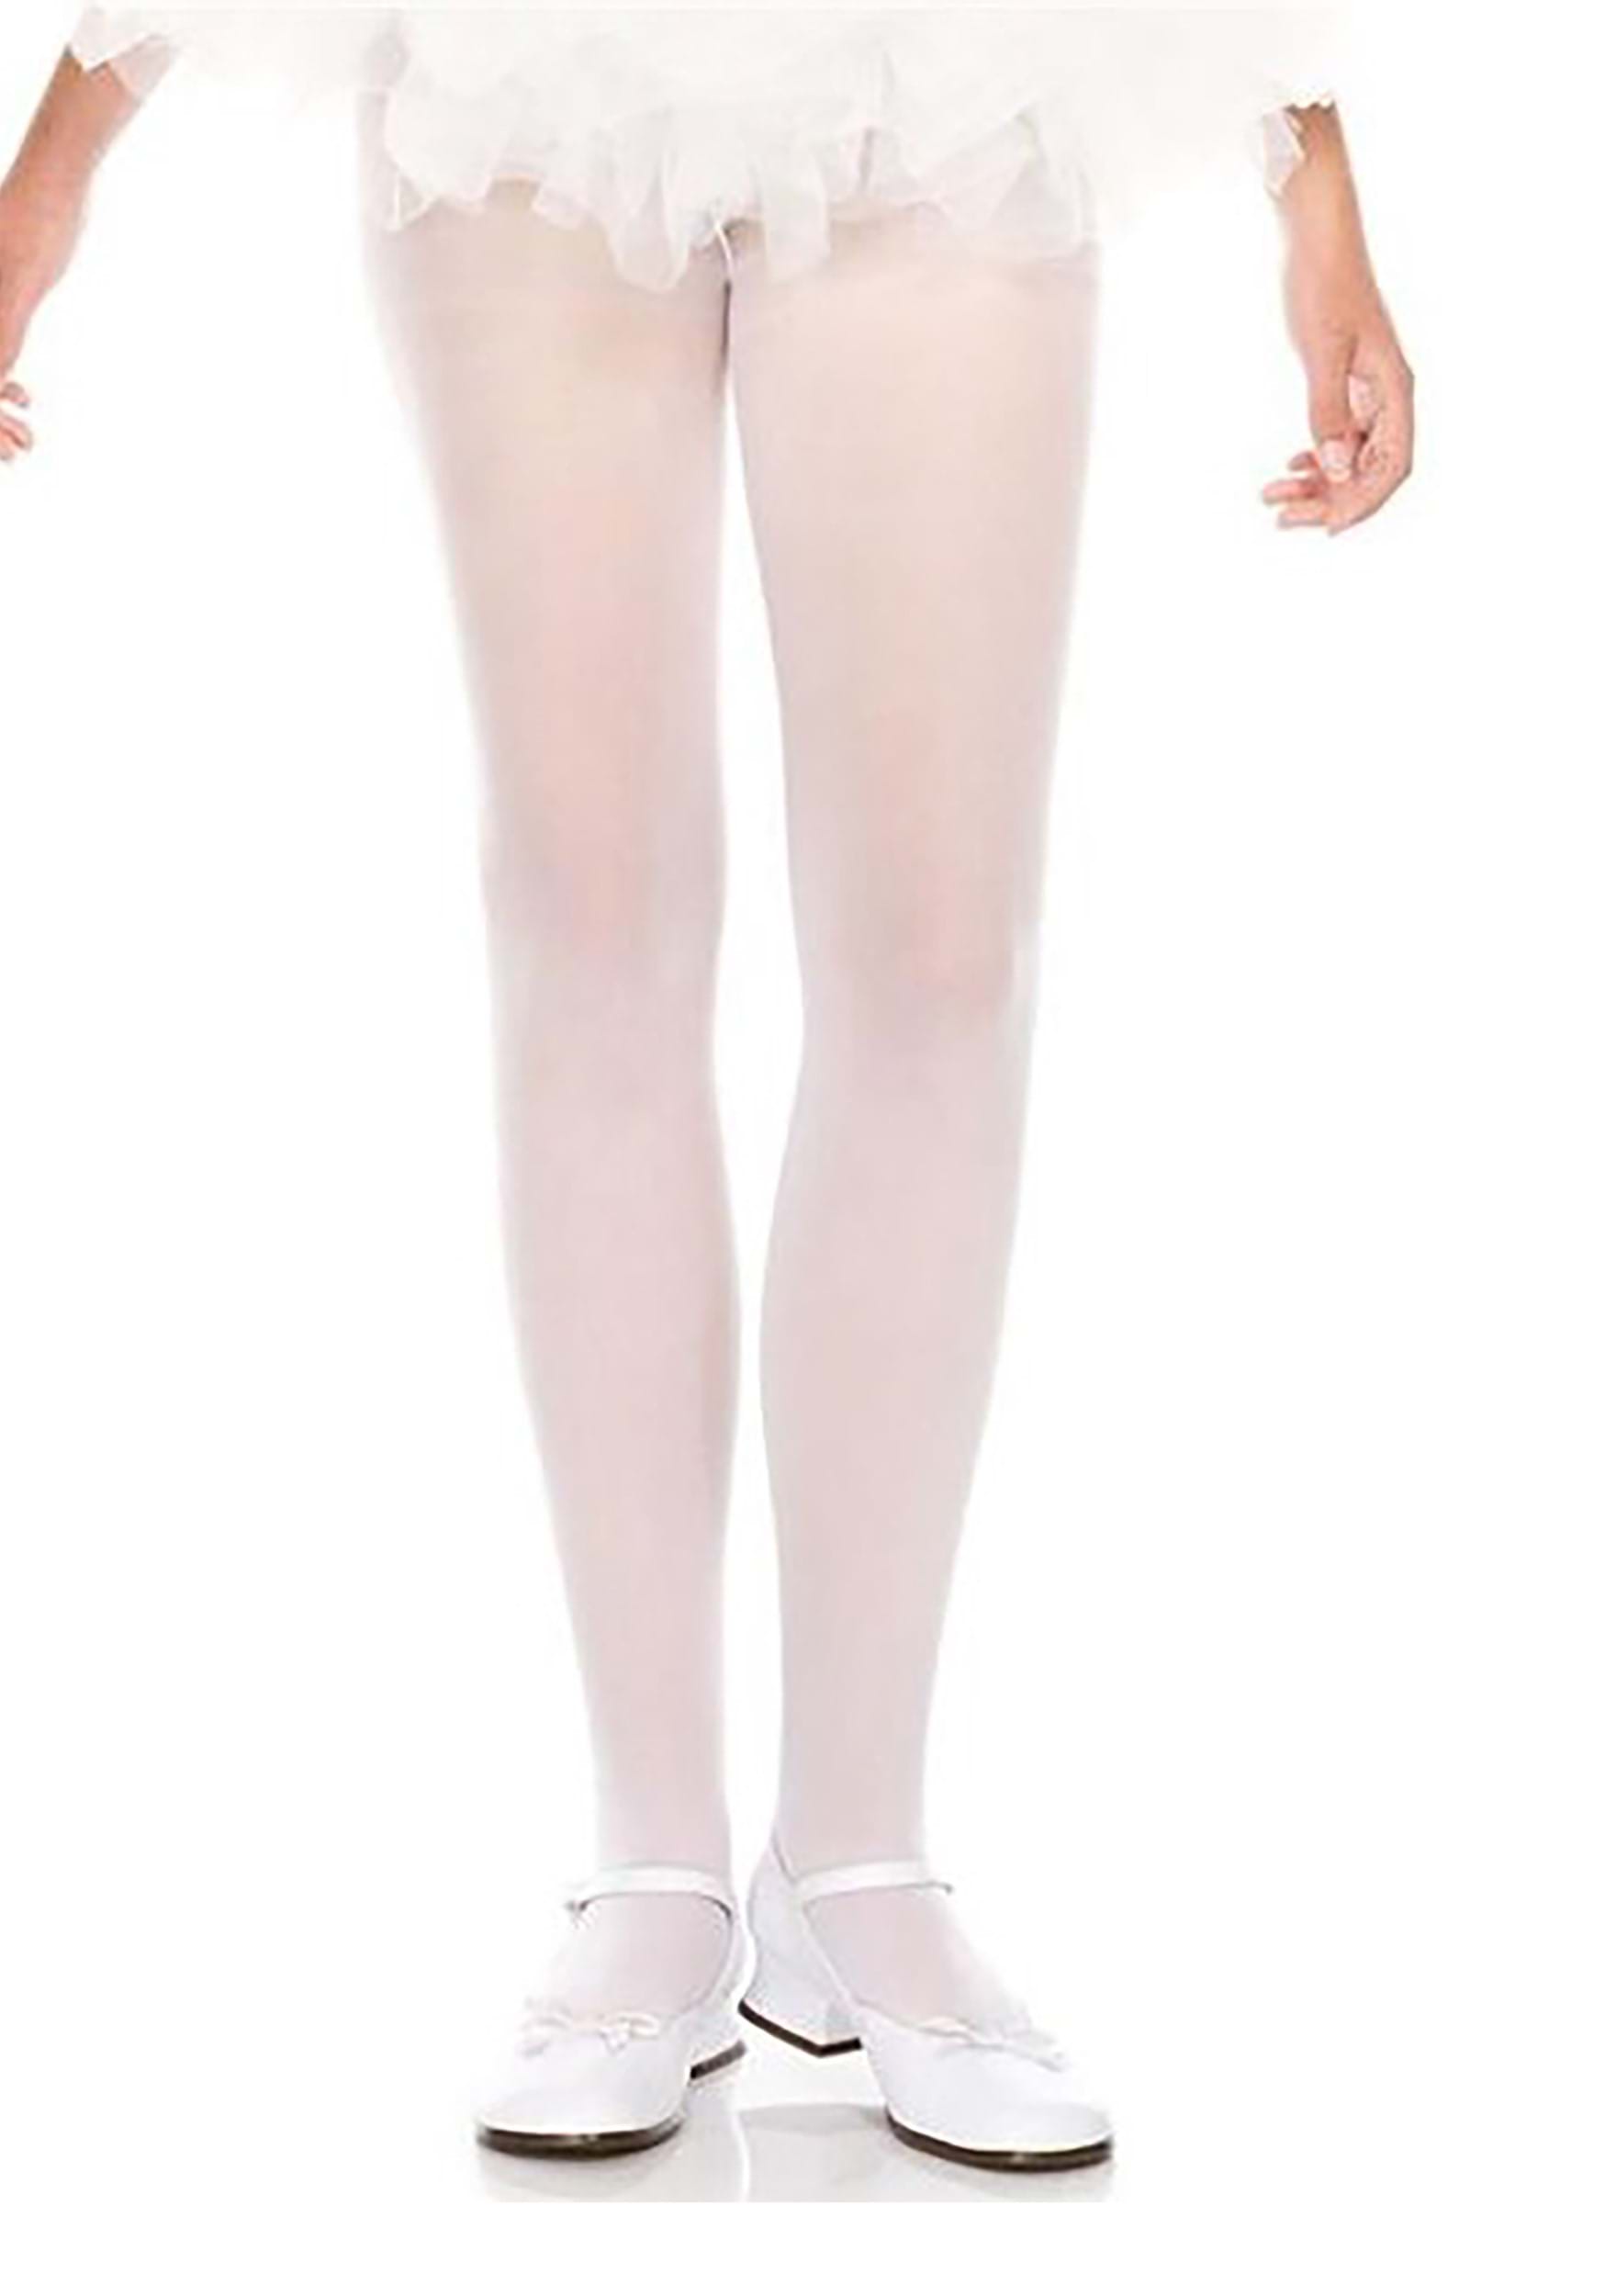 https://images.halloweencostumes.com.au/products/82351/1-1/girls-opaque-white-tights.jpg